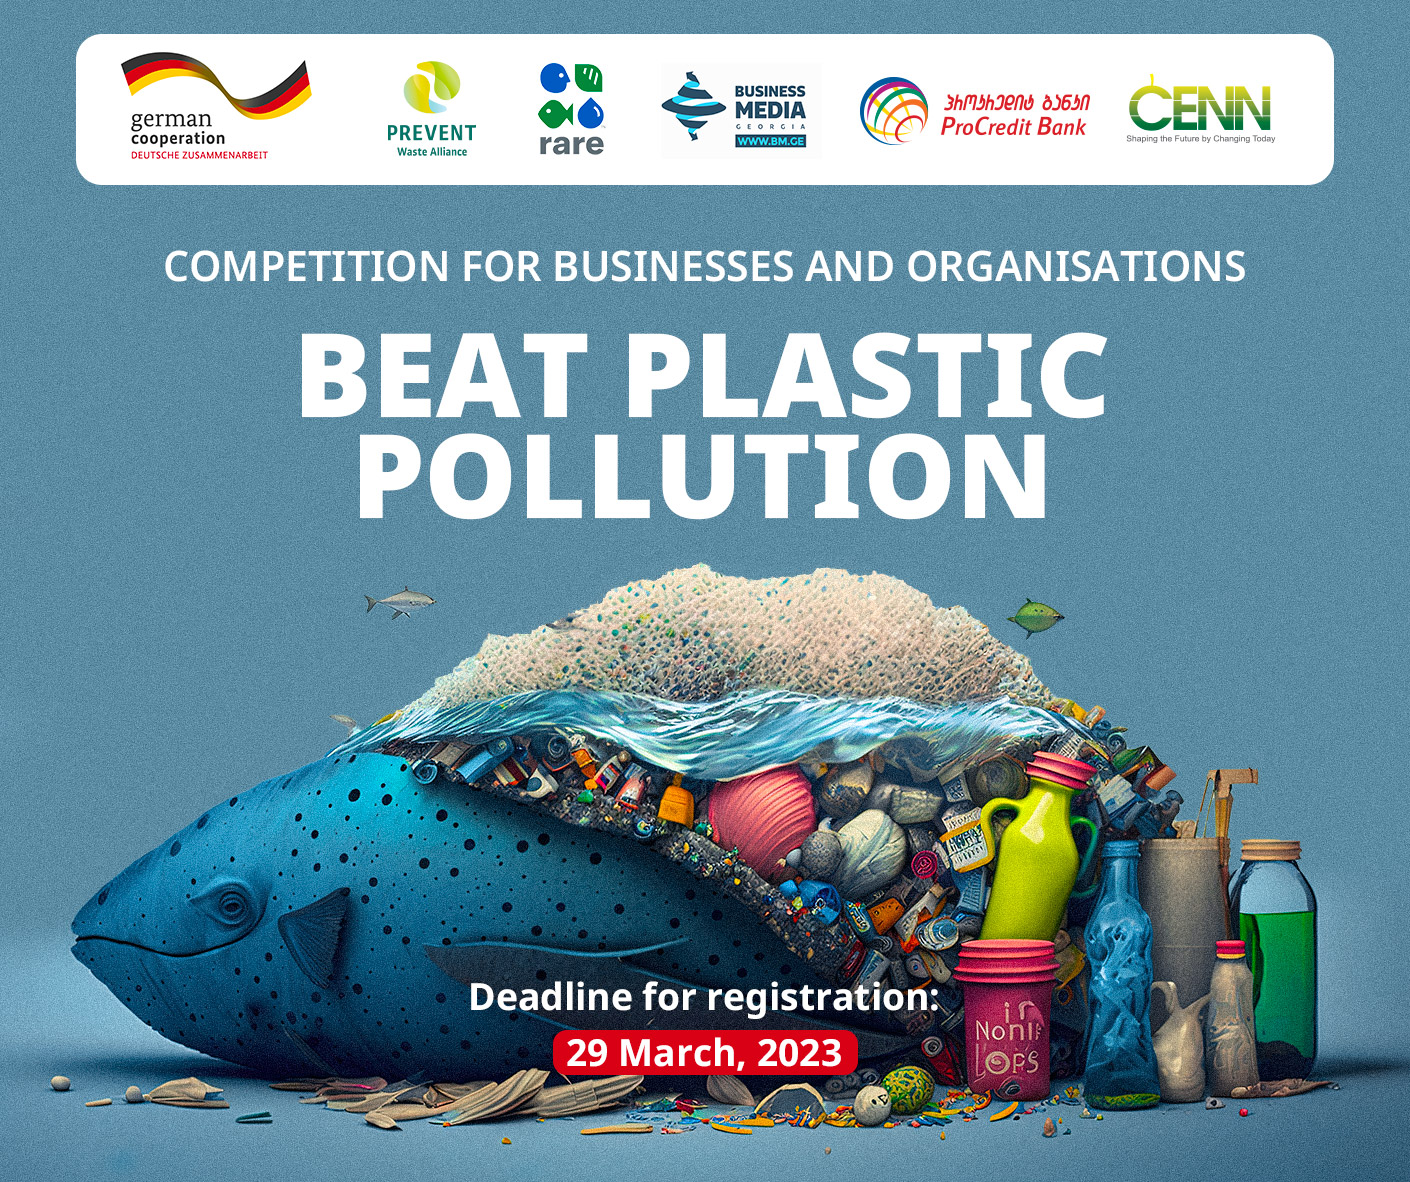 Become a Green Company! CENN, with the financial support of the German government is announcing a competition to tackle plastic pollution!